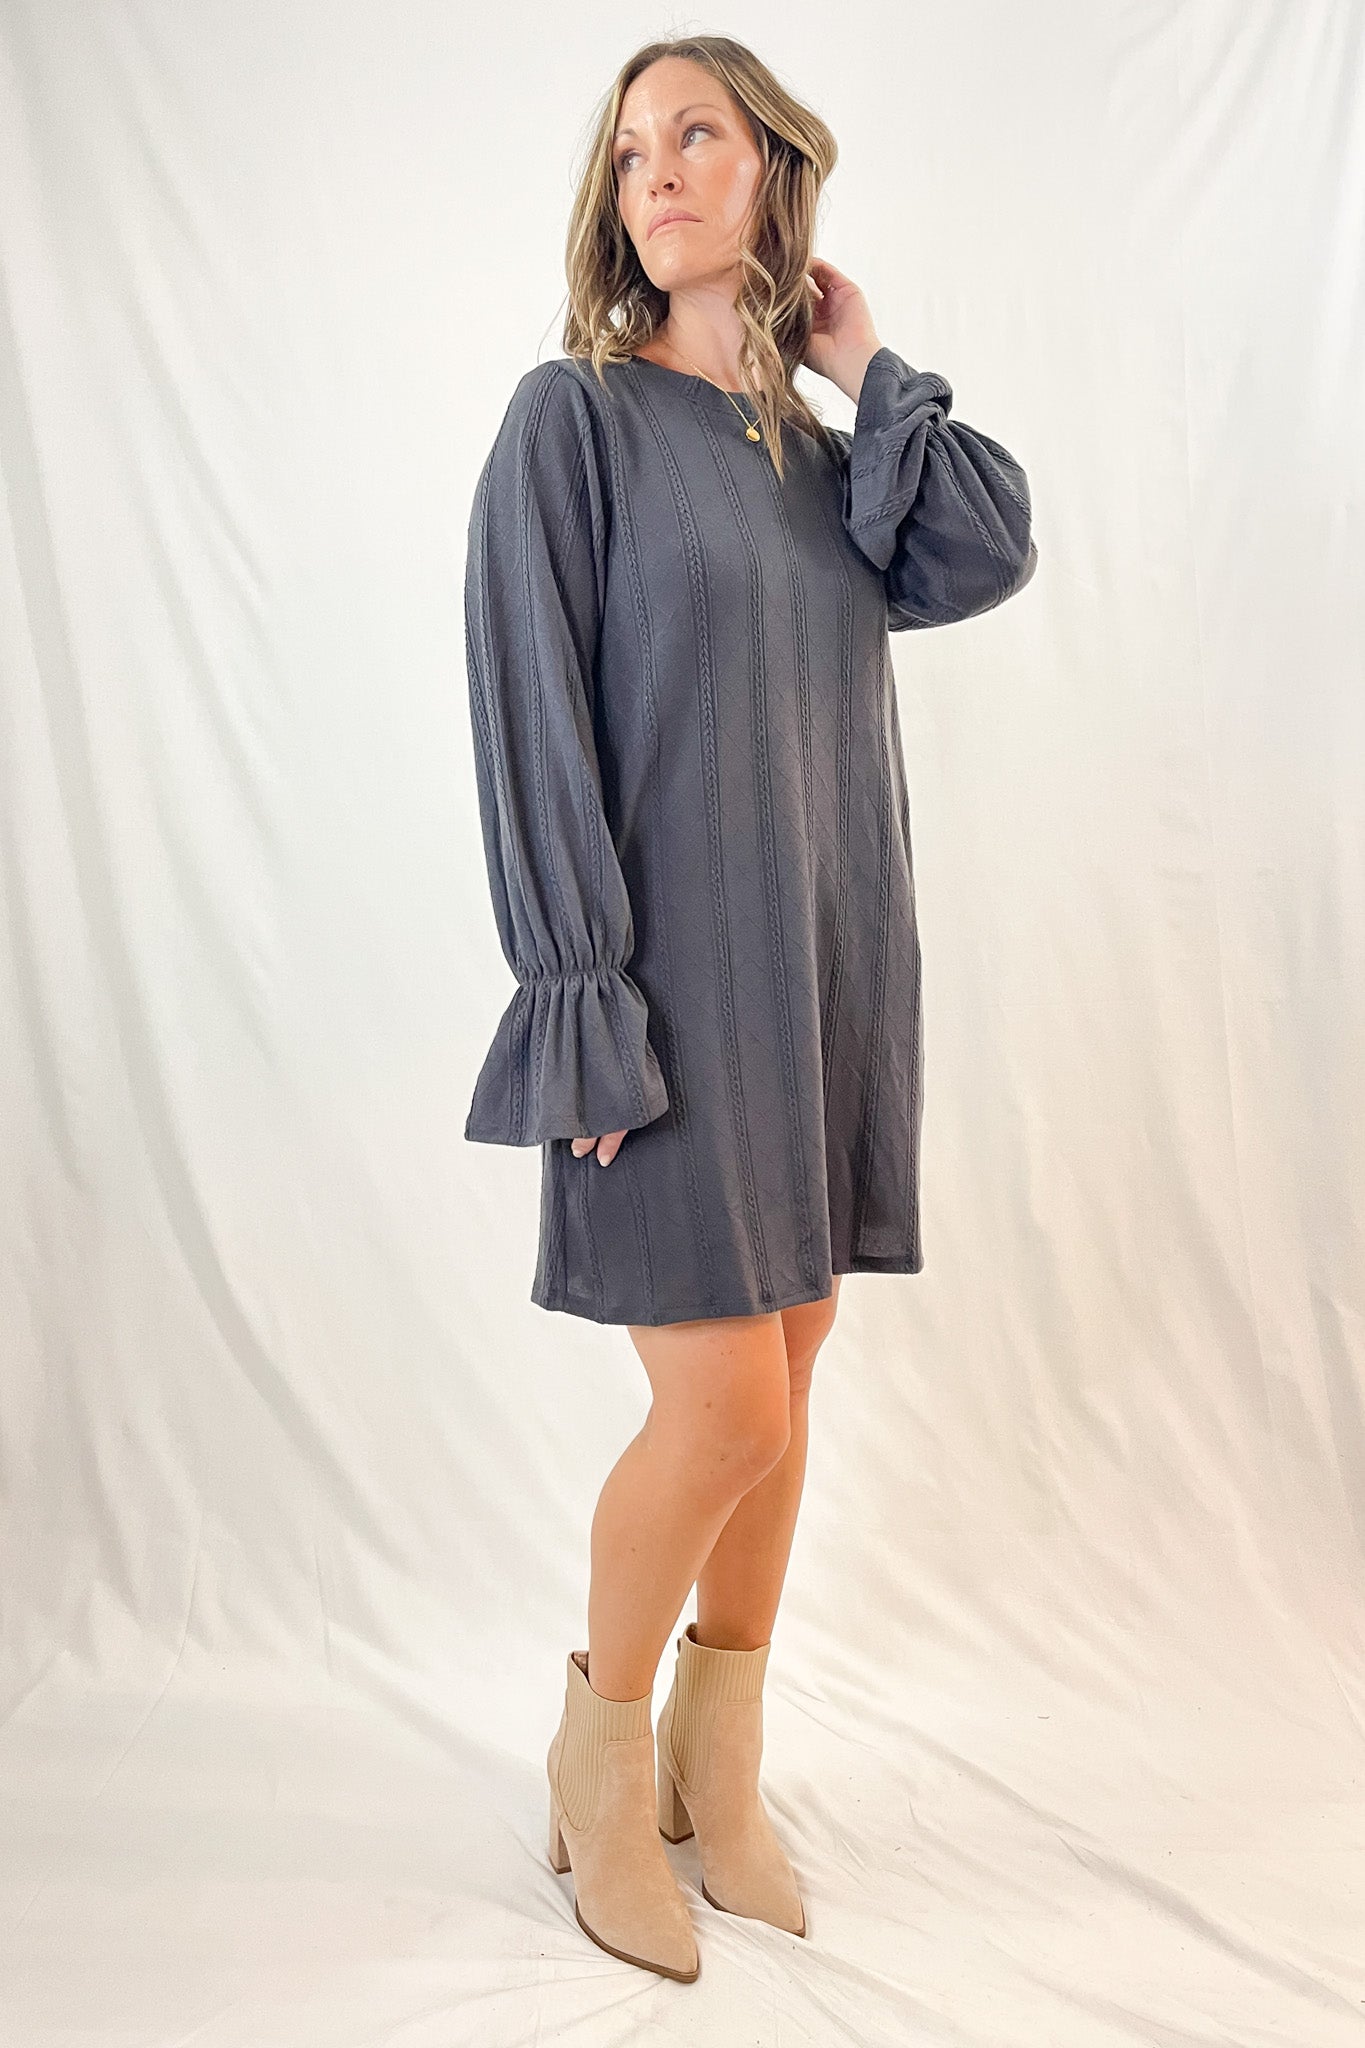 Textured Knit Bell Sleeve Dress | 5 Colors - All Sales Final